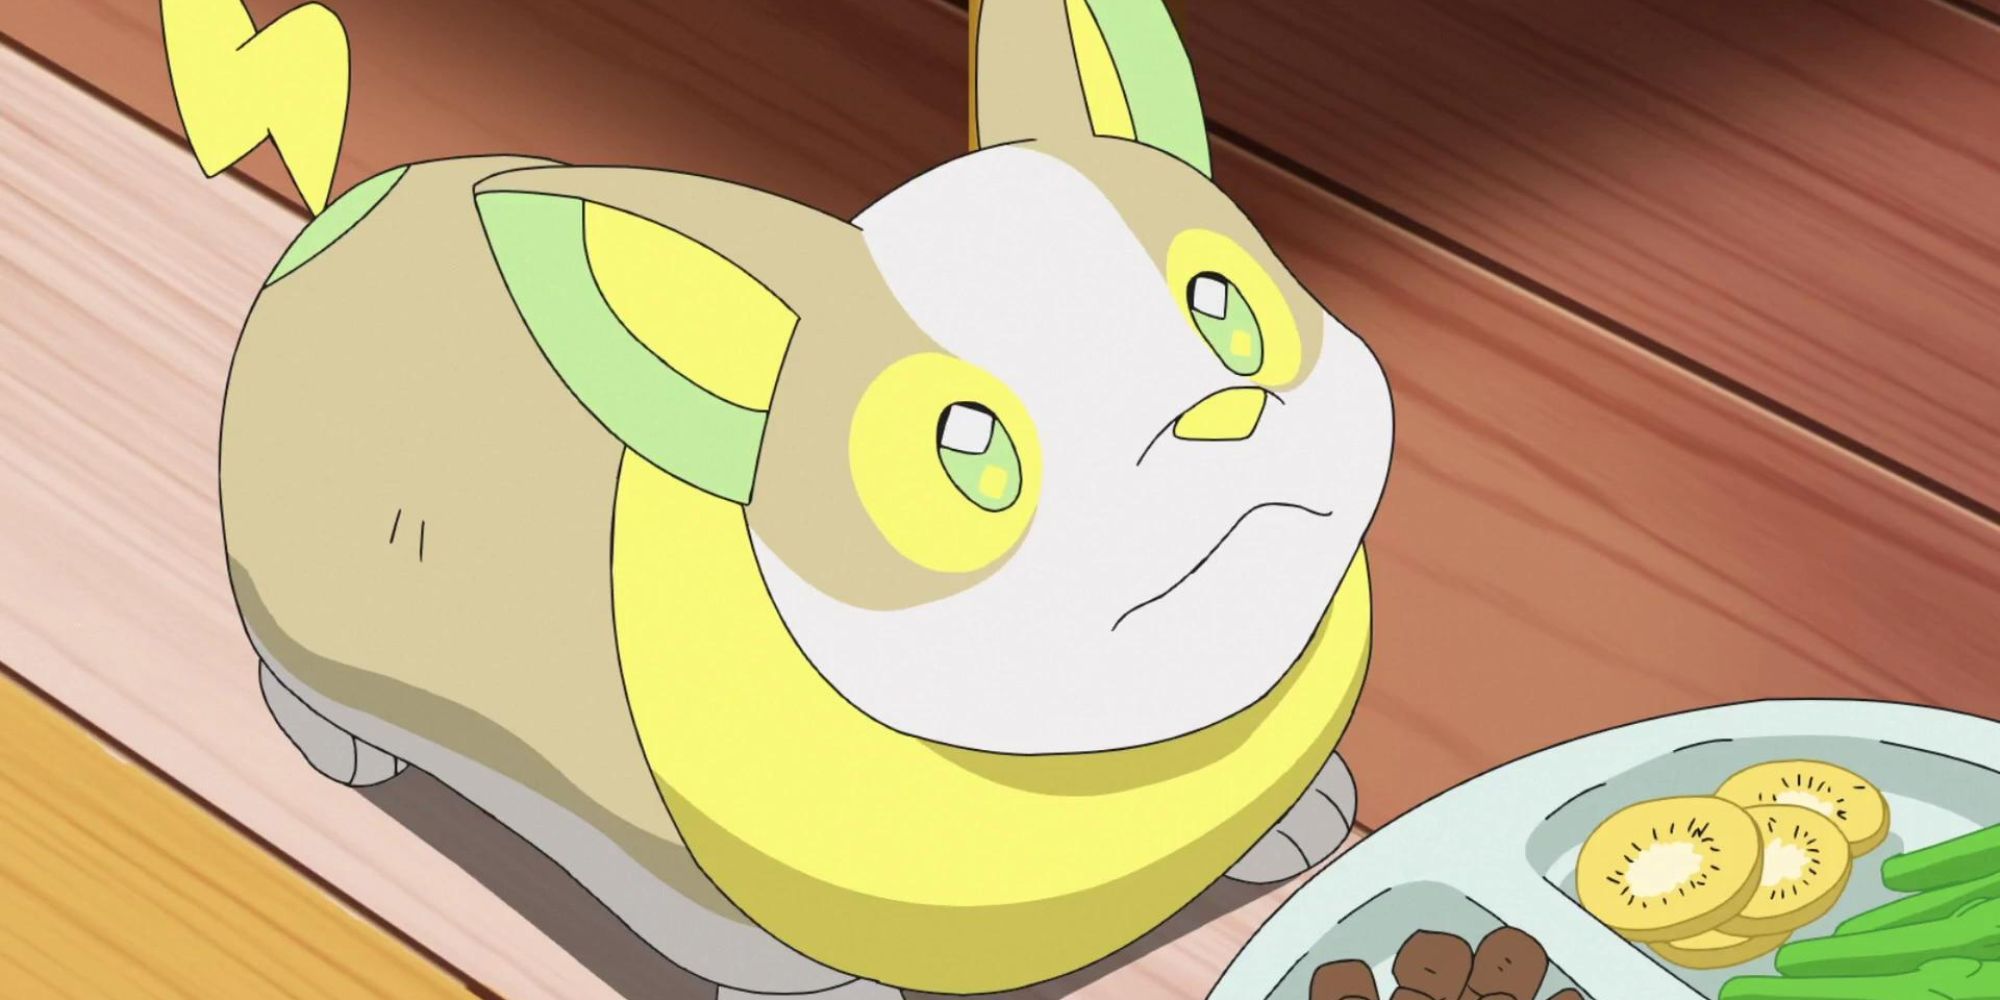 Yamper looks up at a plate of food